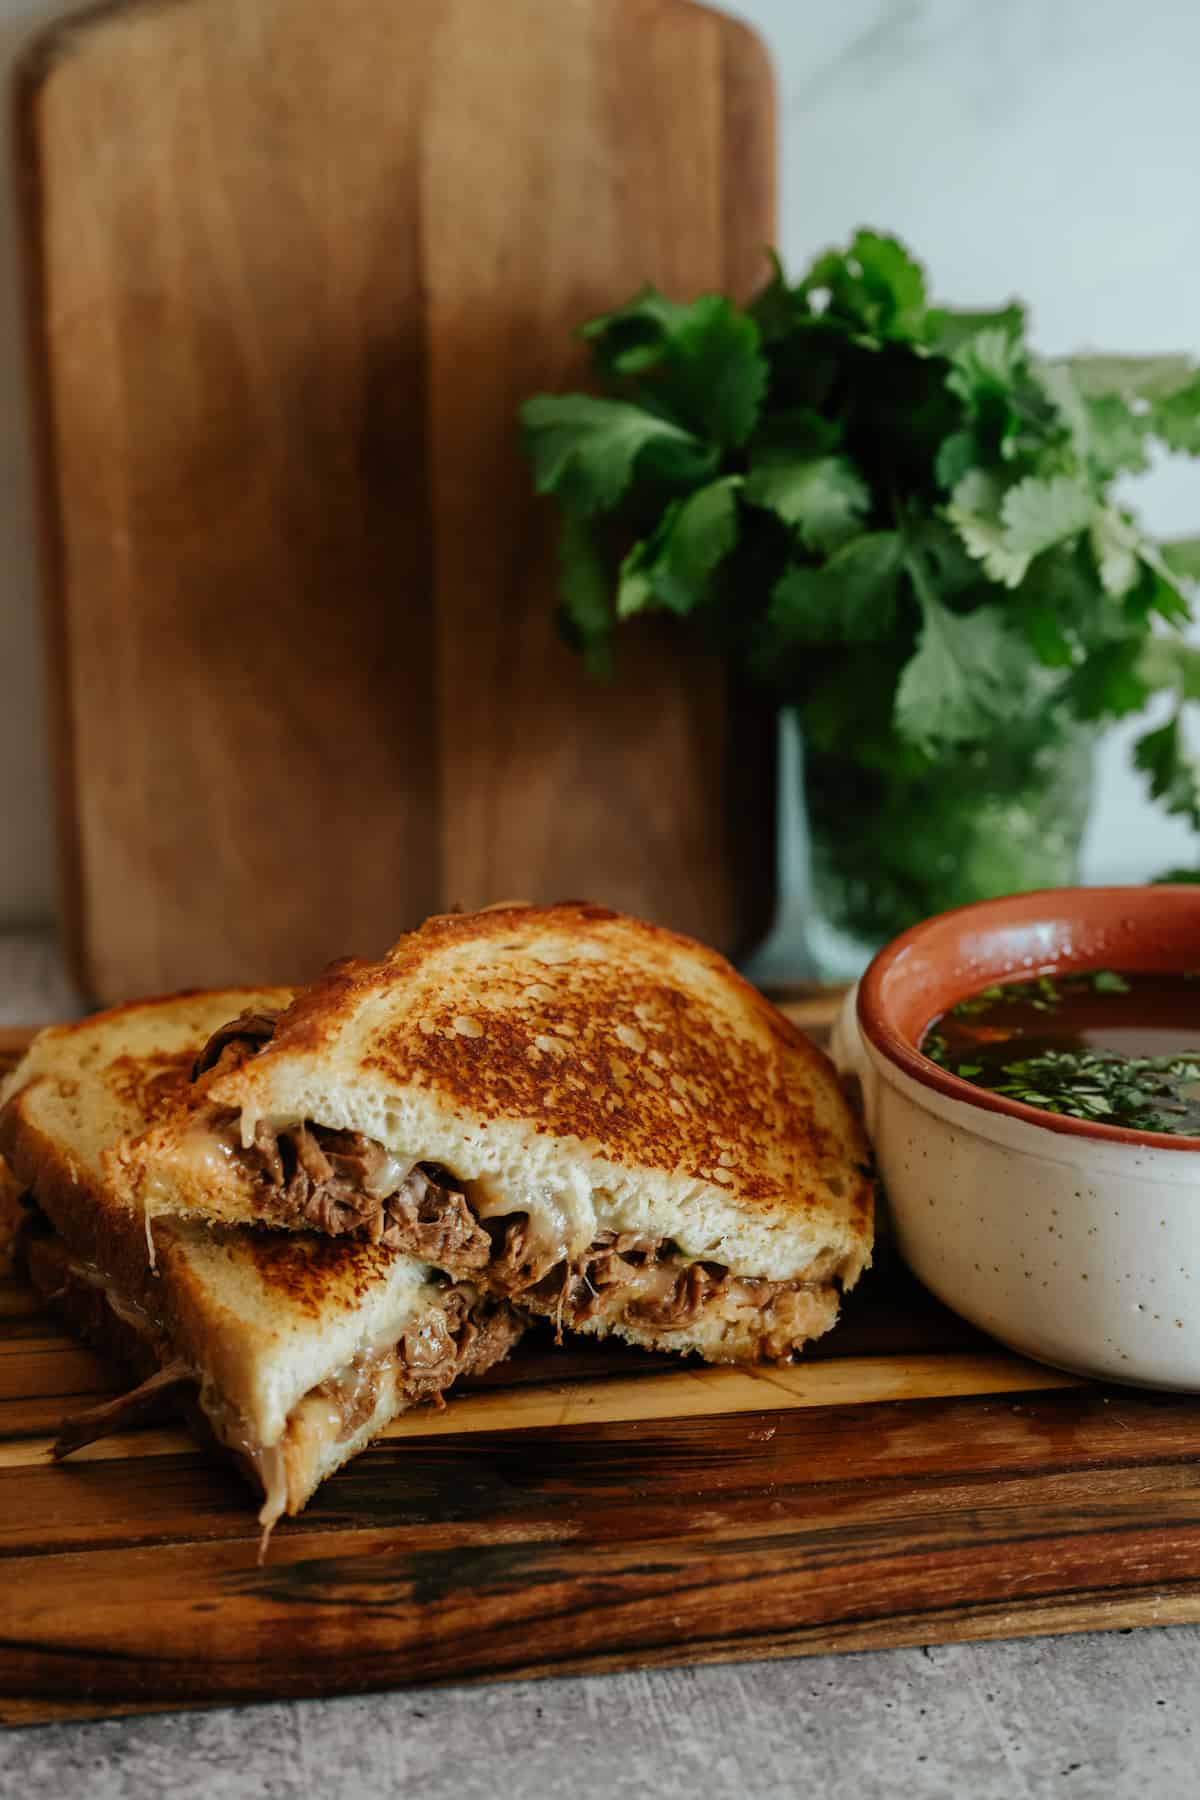 golden, gooey birria grilled cheese sandwich on a rectangular wooden plate next to a bowl of consomme.